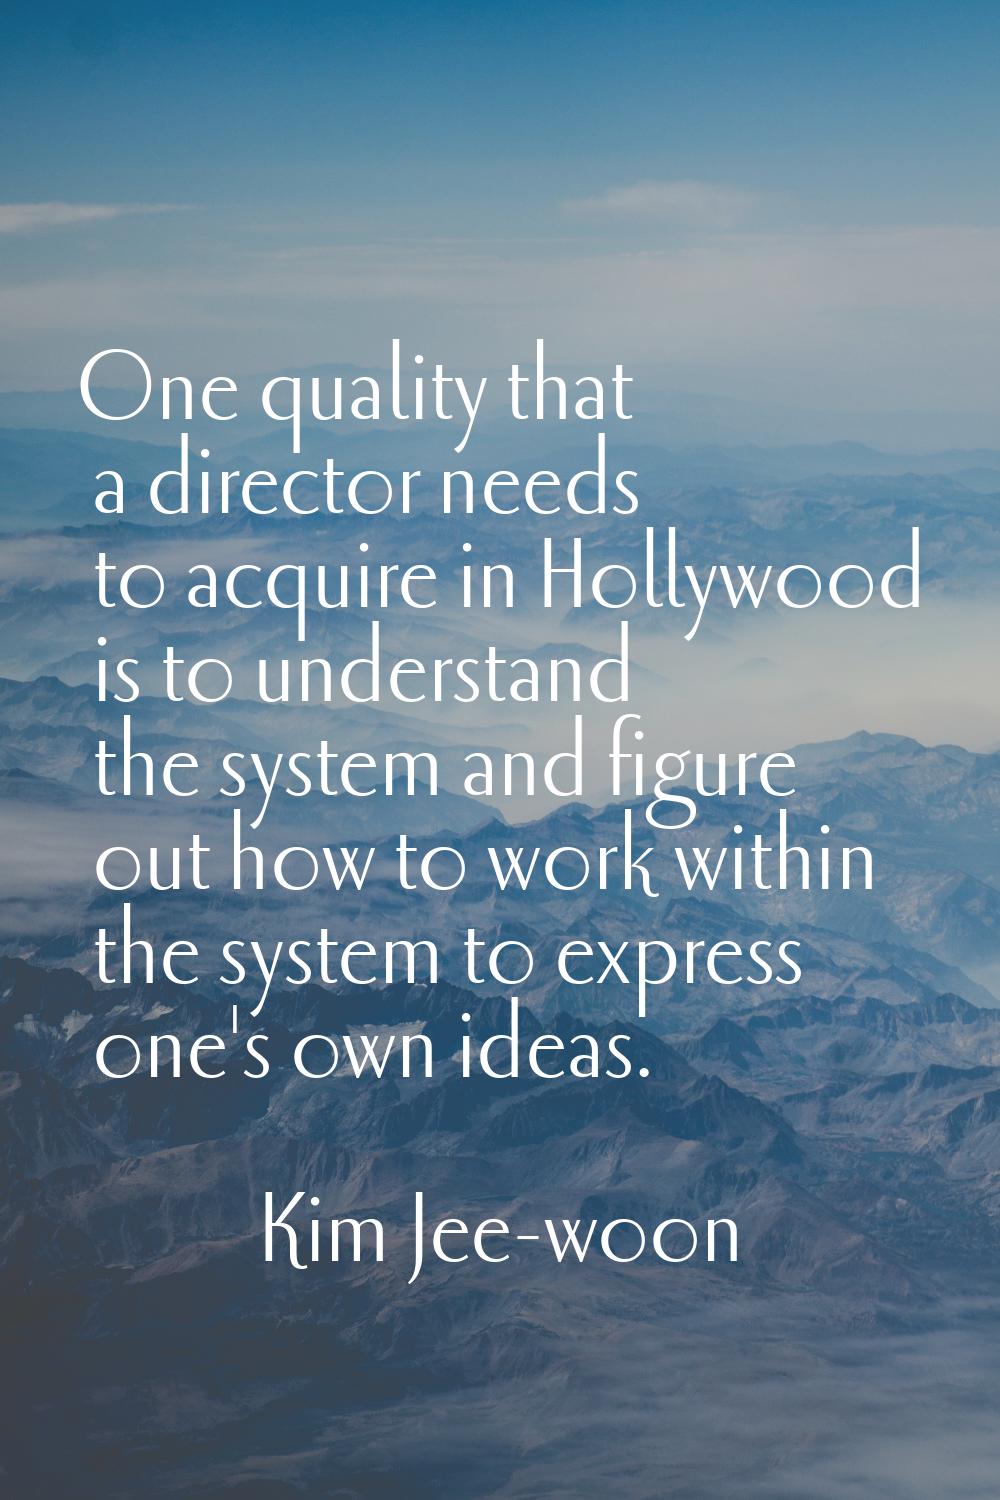 One quality that a director needs to acquire in Hollywood is to understand the system and figure ou